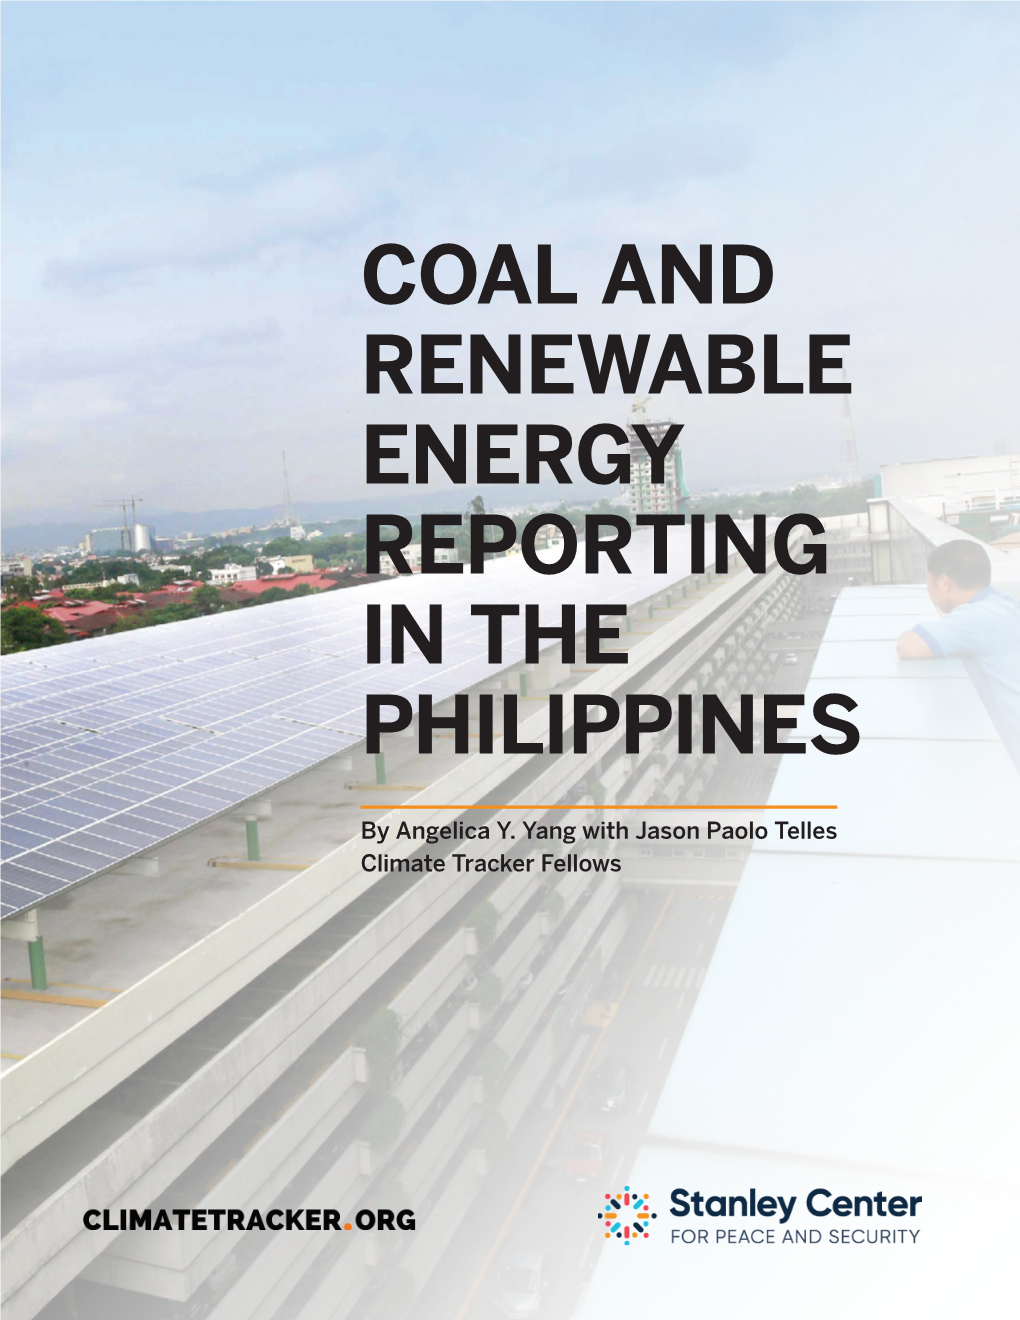 Coal and Renewable Energy Reporting in the Philippines